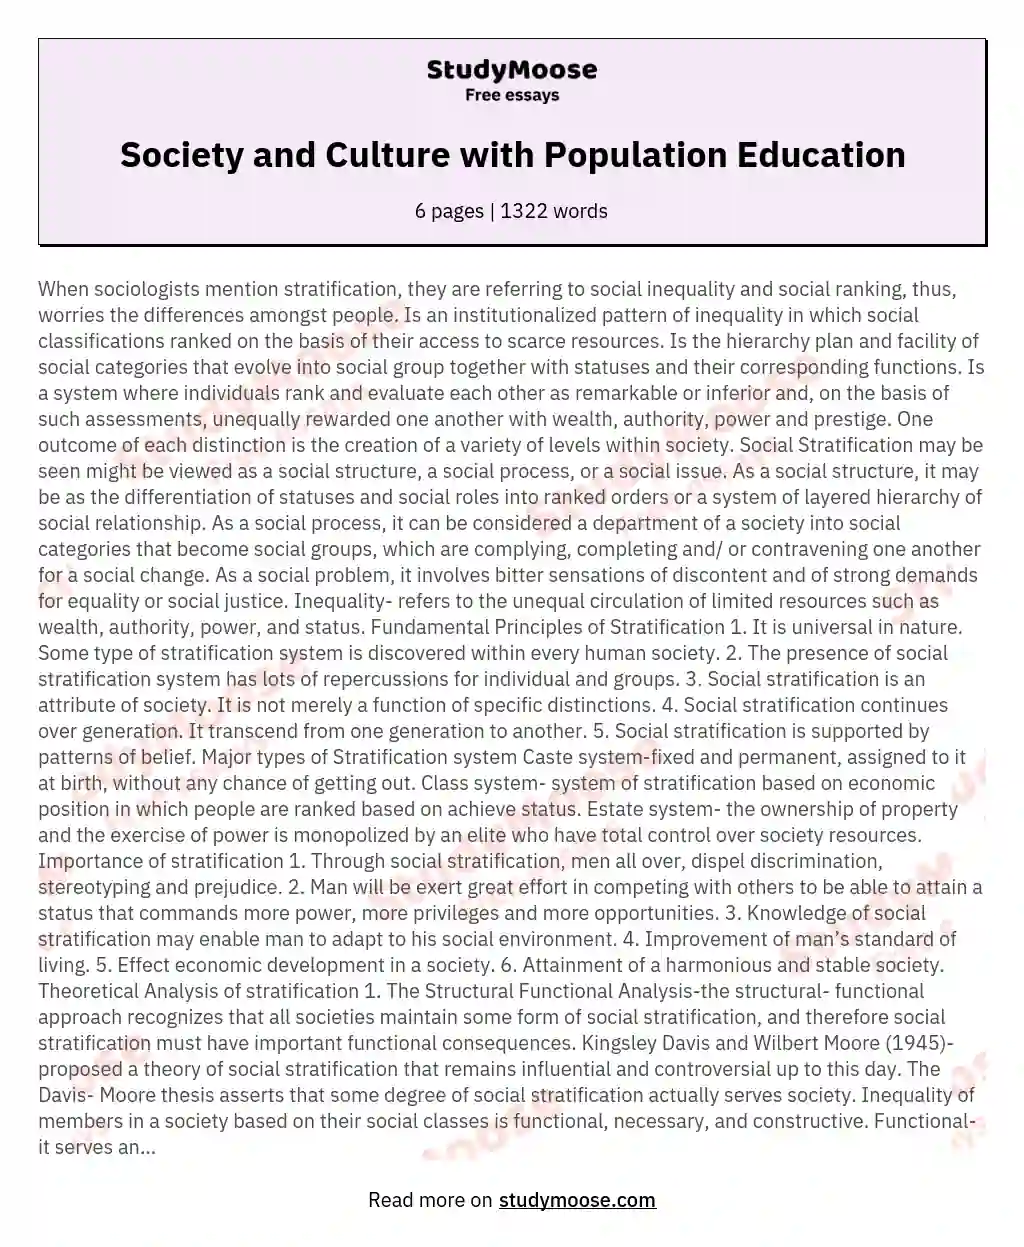 Society and Culture with Population Education